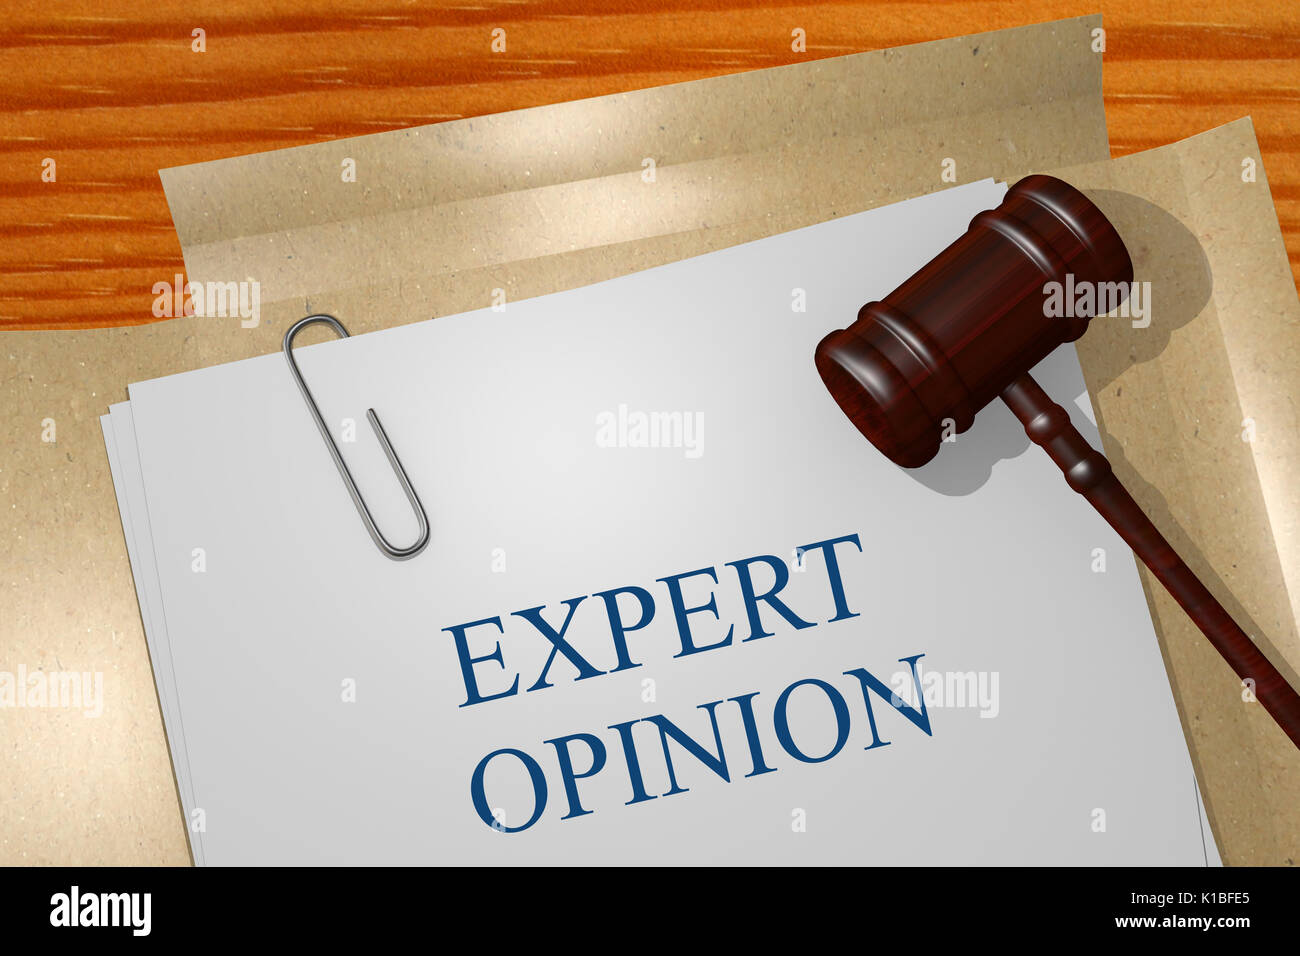 Expert opinion Title On Legal Documents Stock Photo